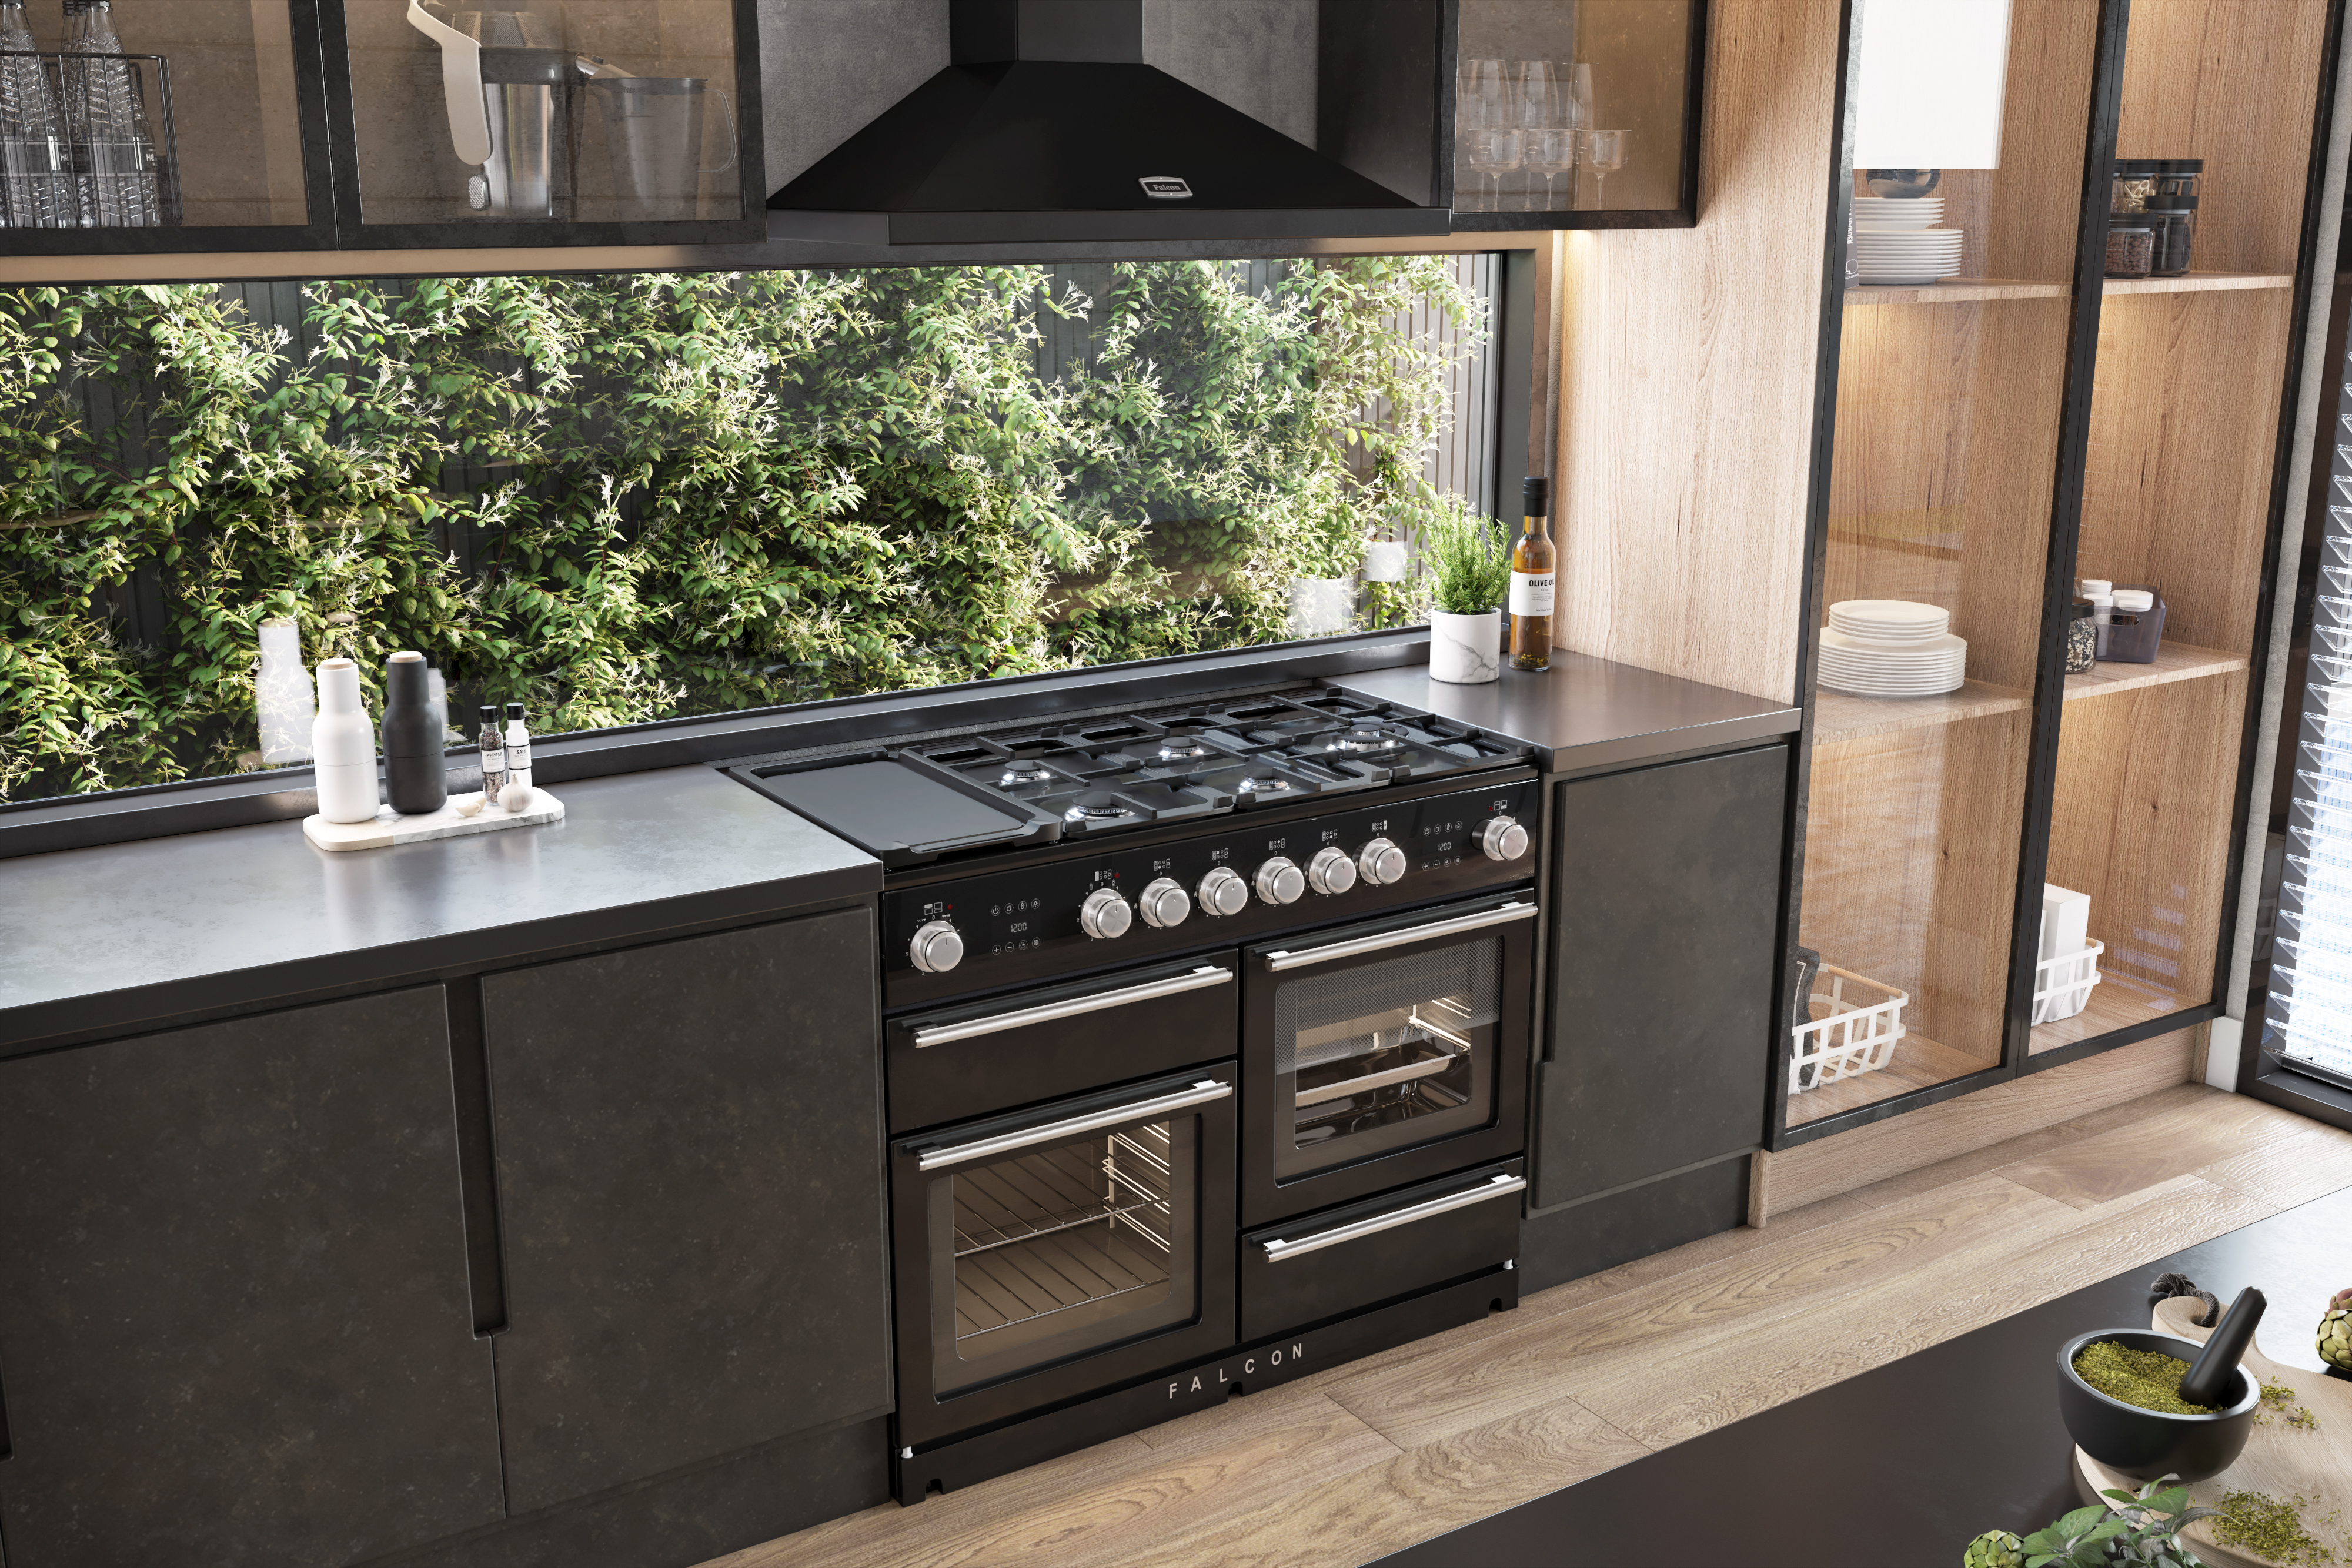 Save 30%* Off Any Falcon Rangehood When Purchased With Any Falcon Range Cooker at Hart & Co